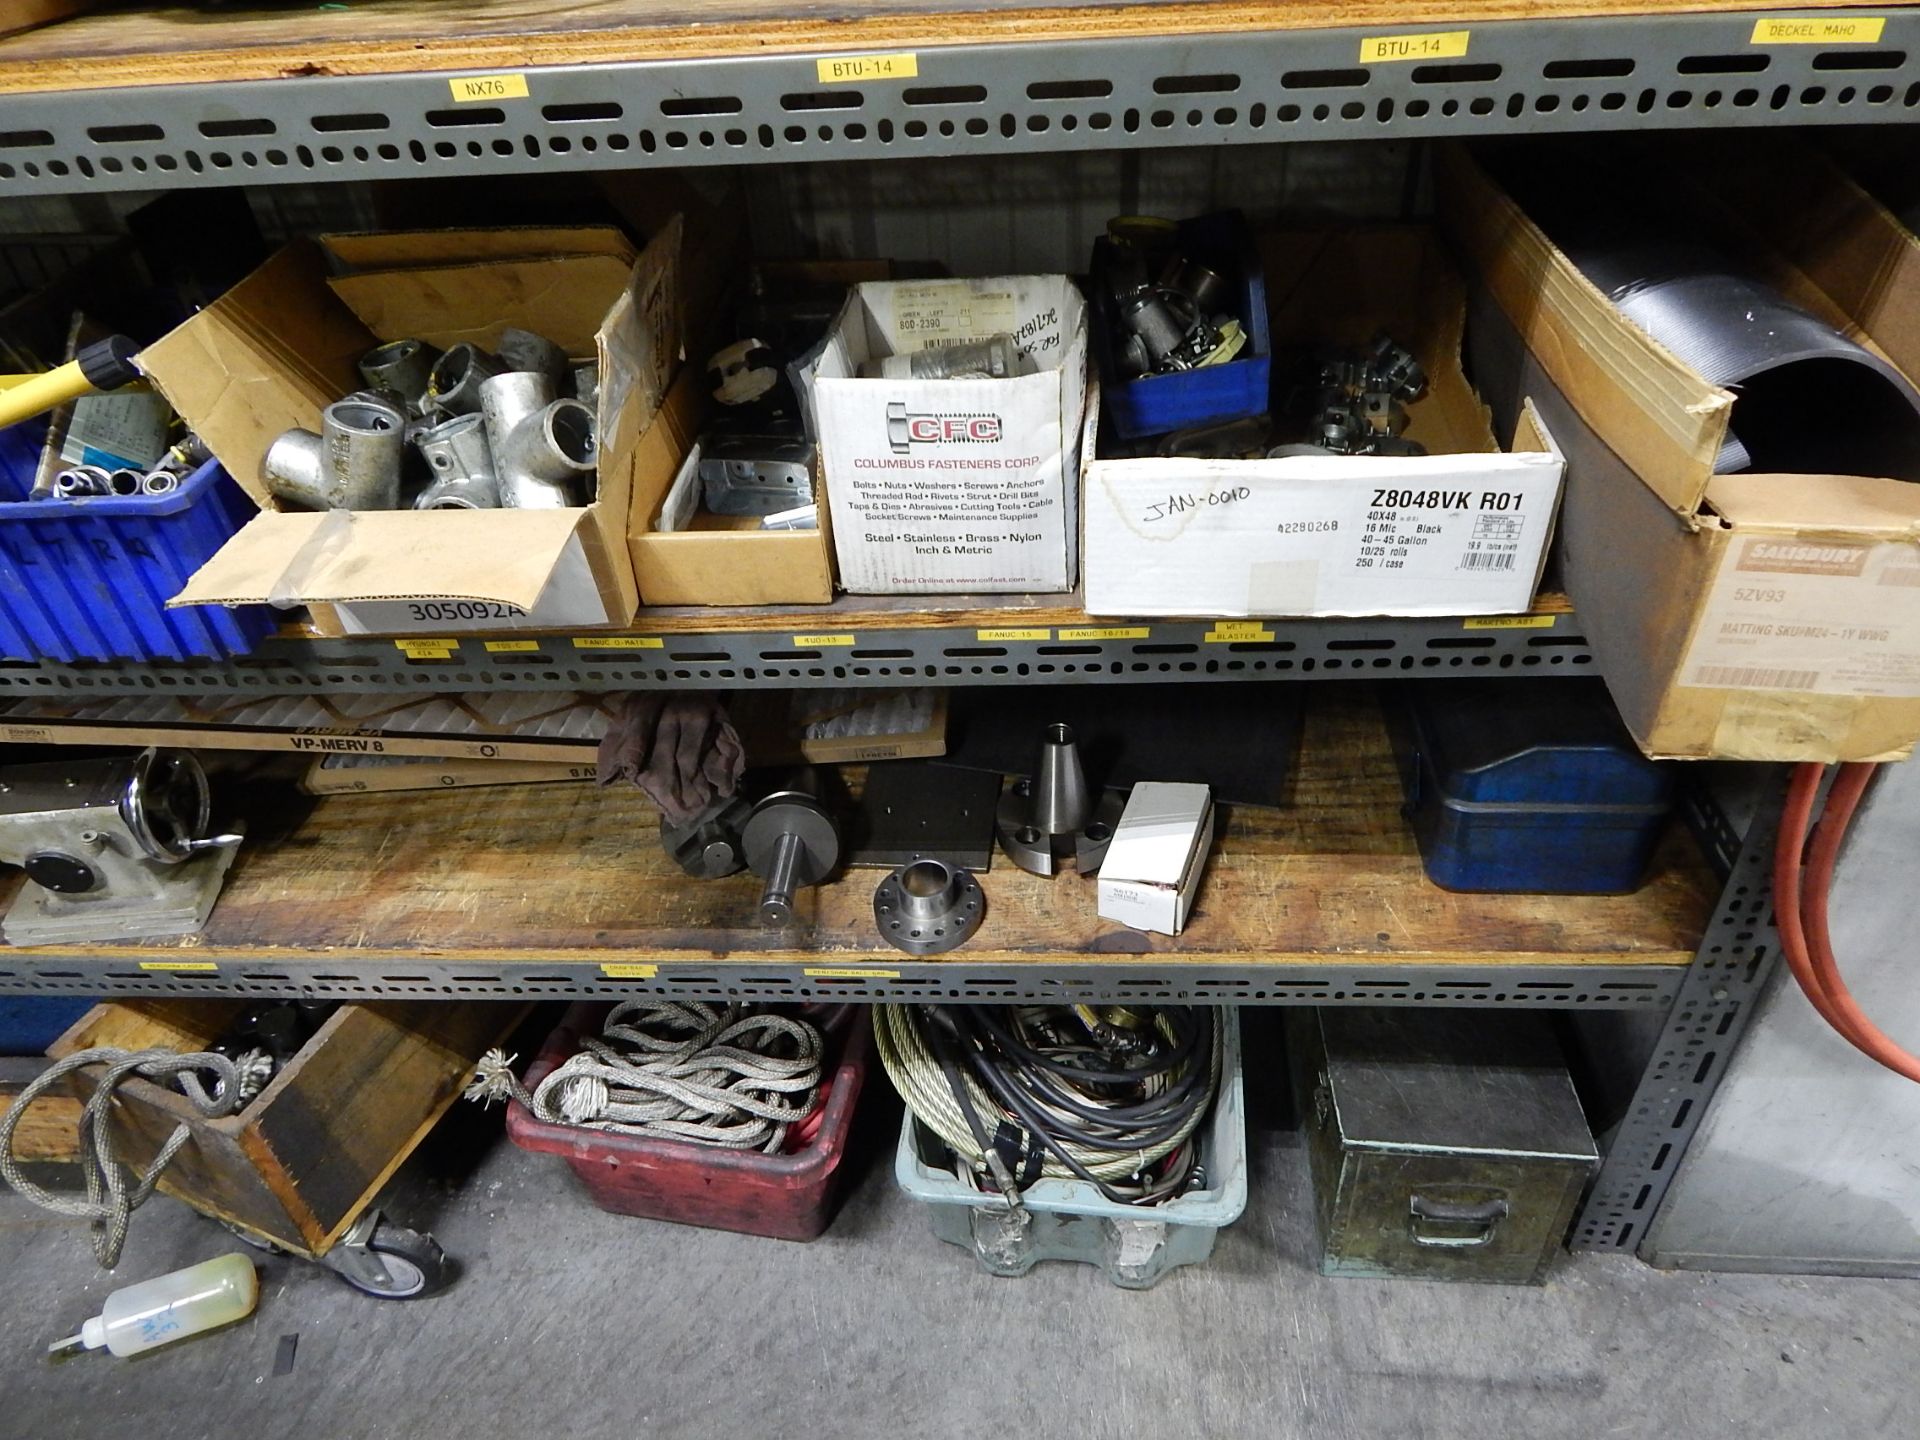 Metal Shelving and Contents of MRO Items - Image 3 of 4